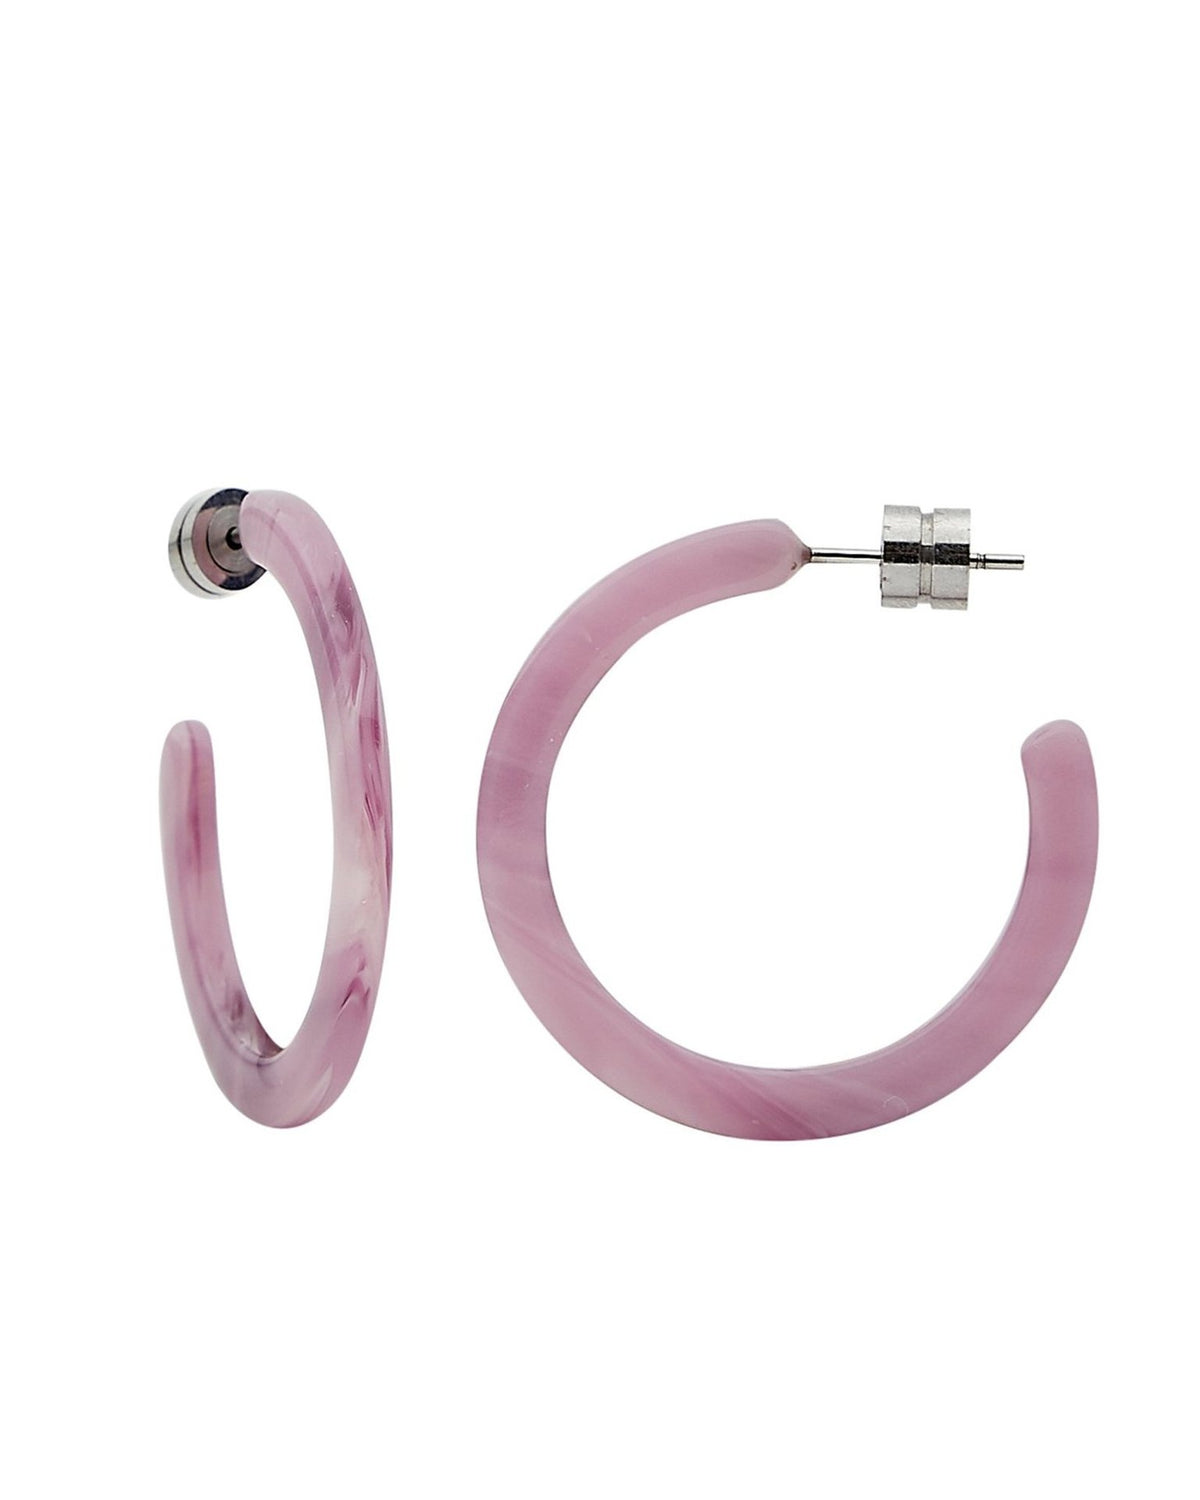 Machete Jewelry Orchid / O/S Mini Hoops in Orchid